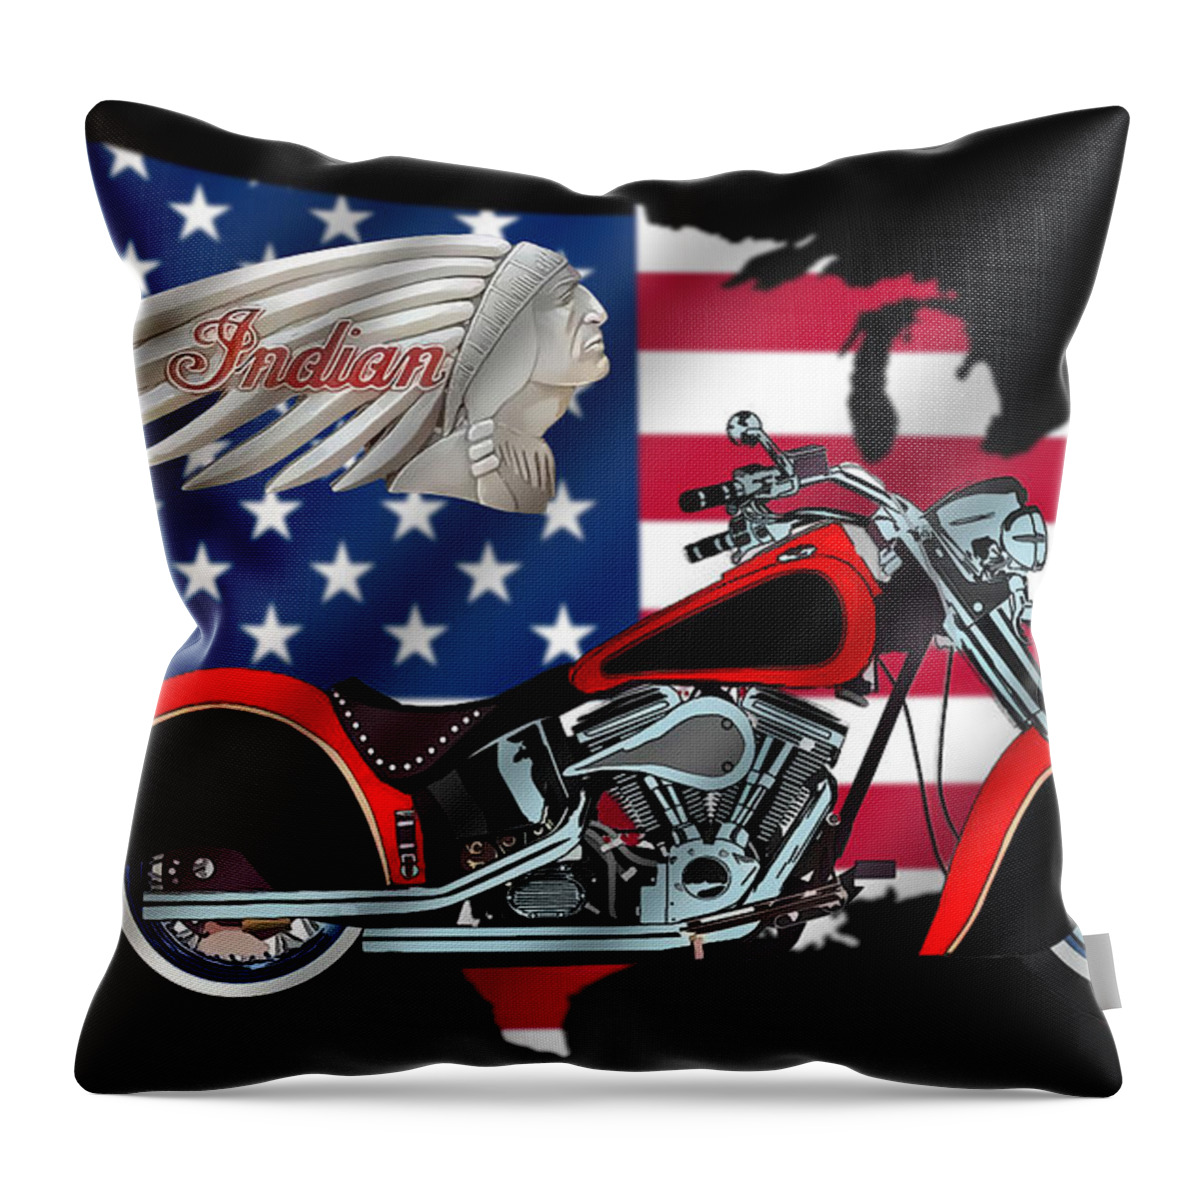 Indian Bike Throw Pillow featuring the digital art Indian Bike Illustration by Chuck Staley